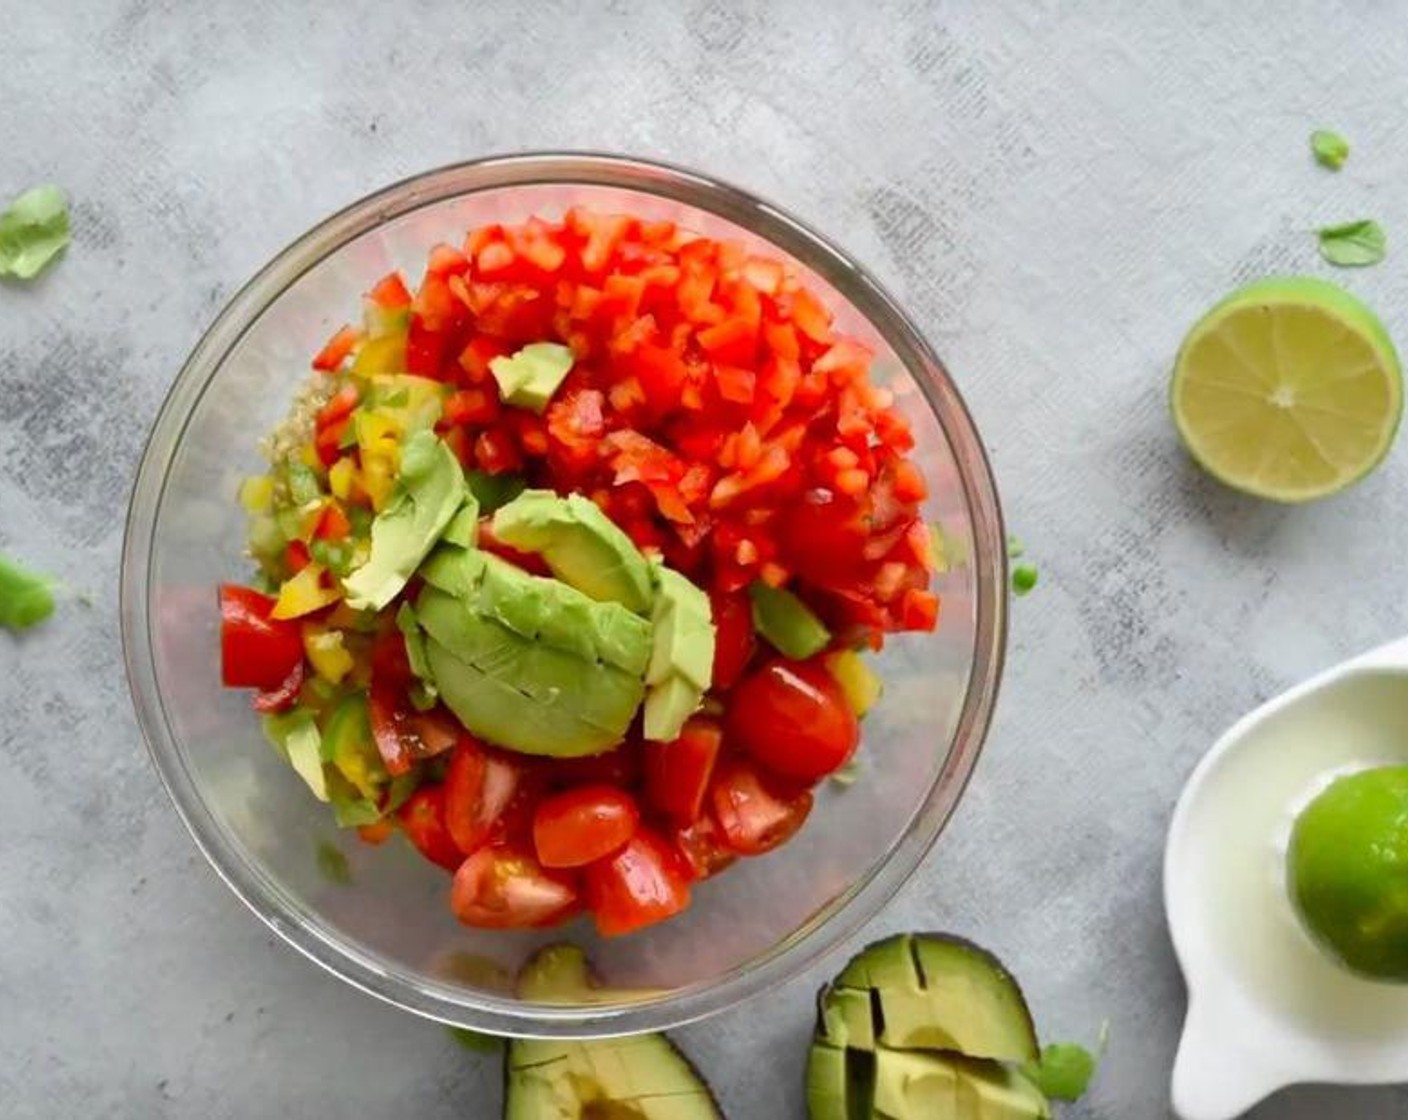 step 1 In a large bowl, mix Quinoa (1 cup), Bell Pepper (1 cup), Roma Tomato (1 cup), Avocados (2), and Fresh Mint (1 tsp).